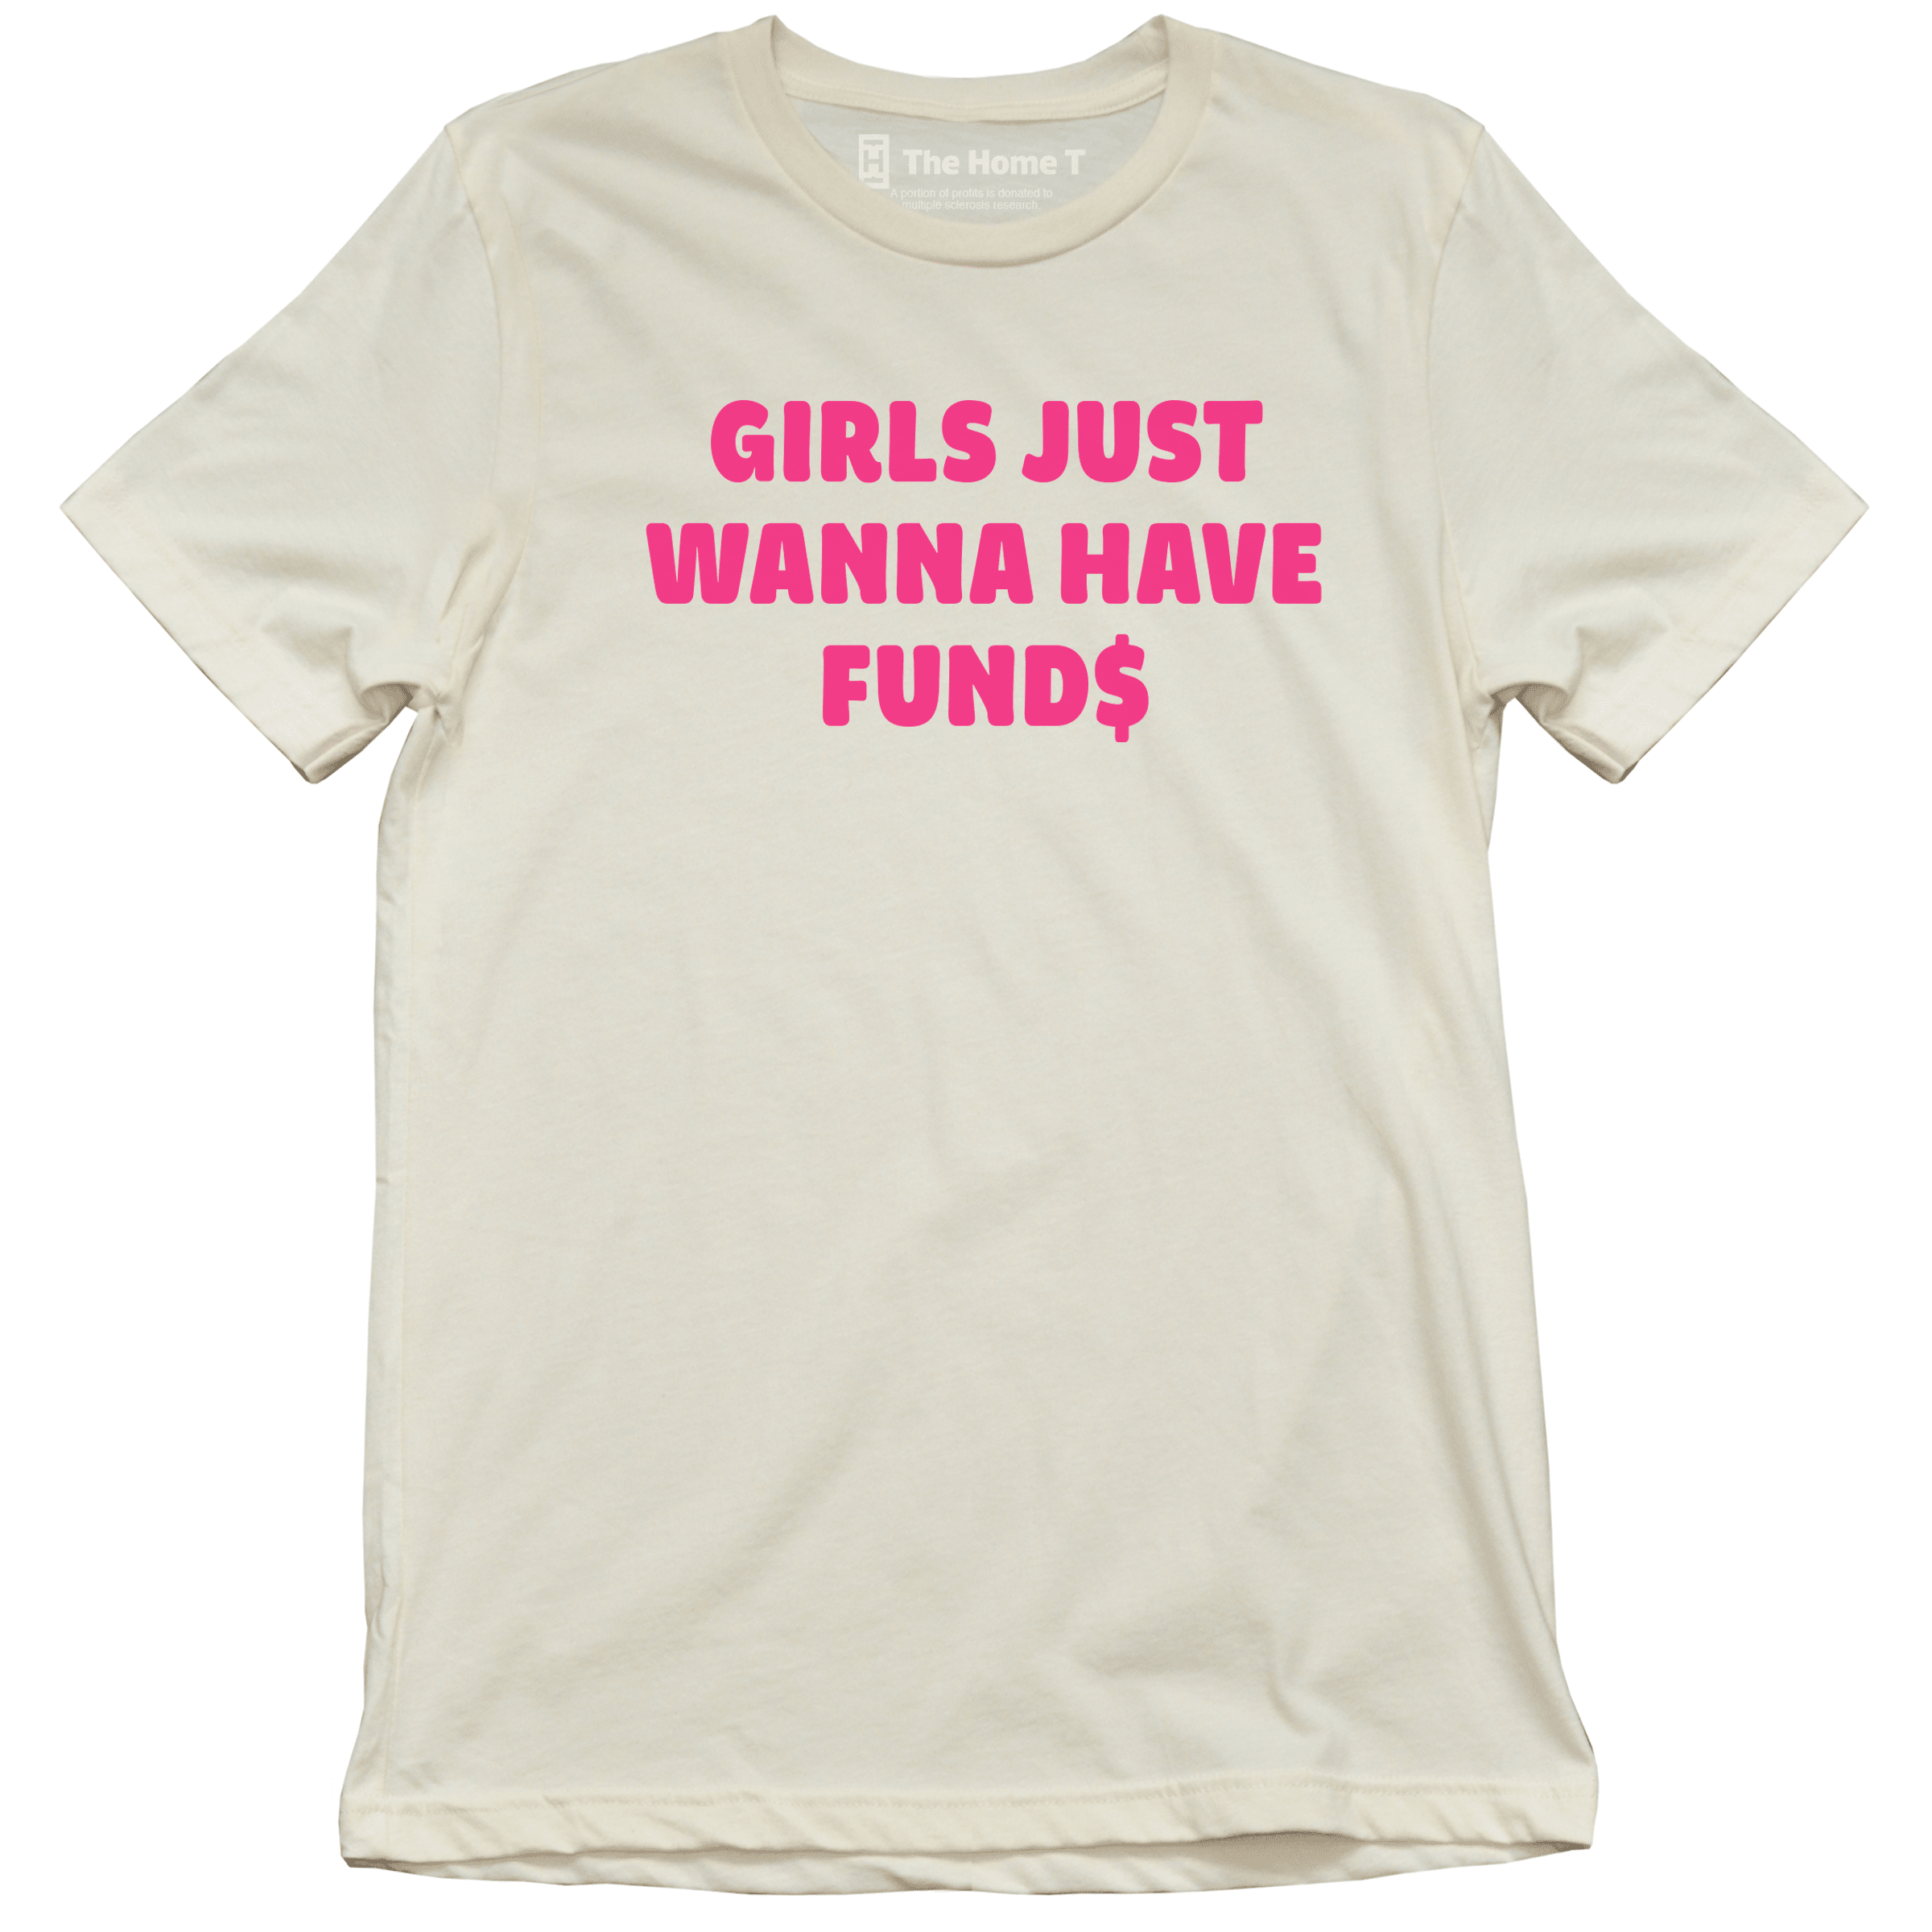 Girls Just Want to Have Fund$